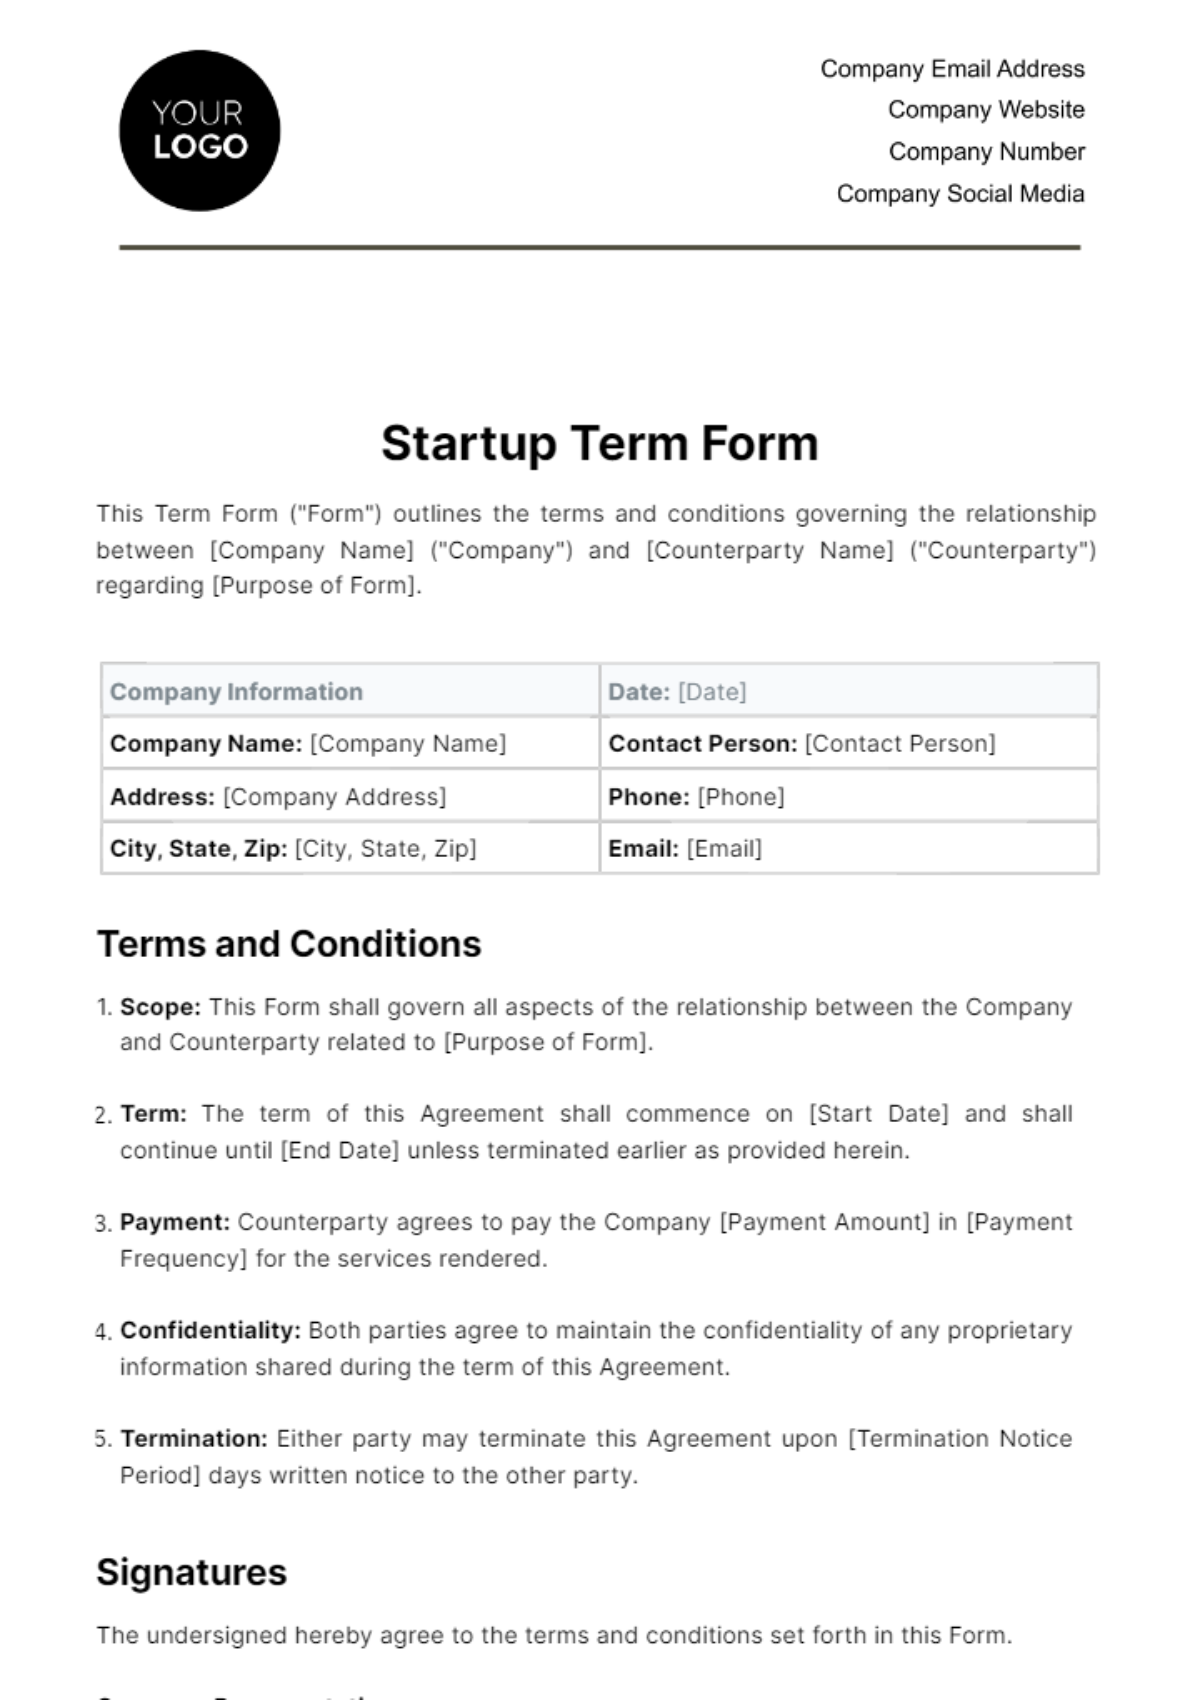 Free Startup Term Form Template